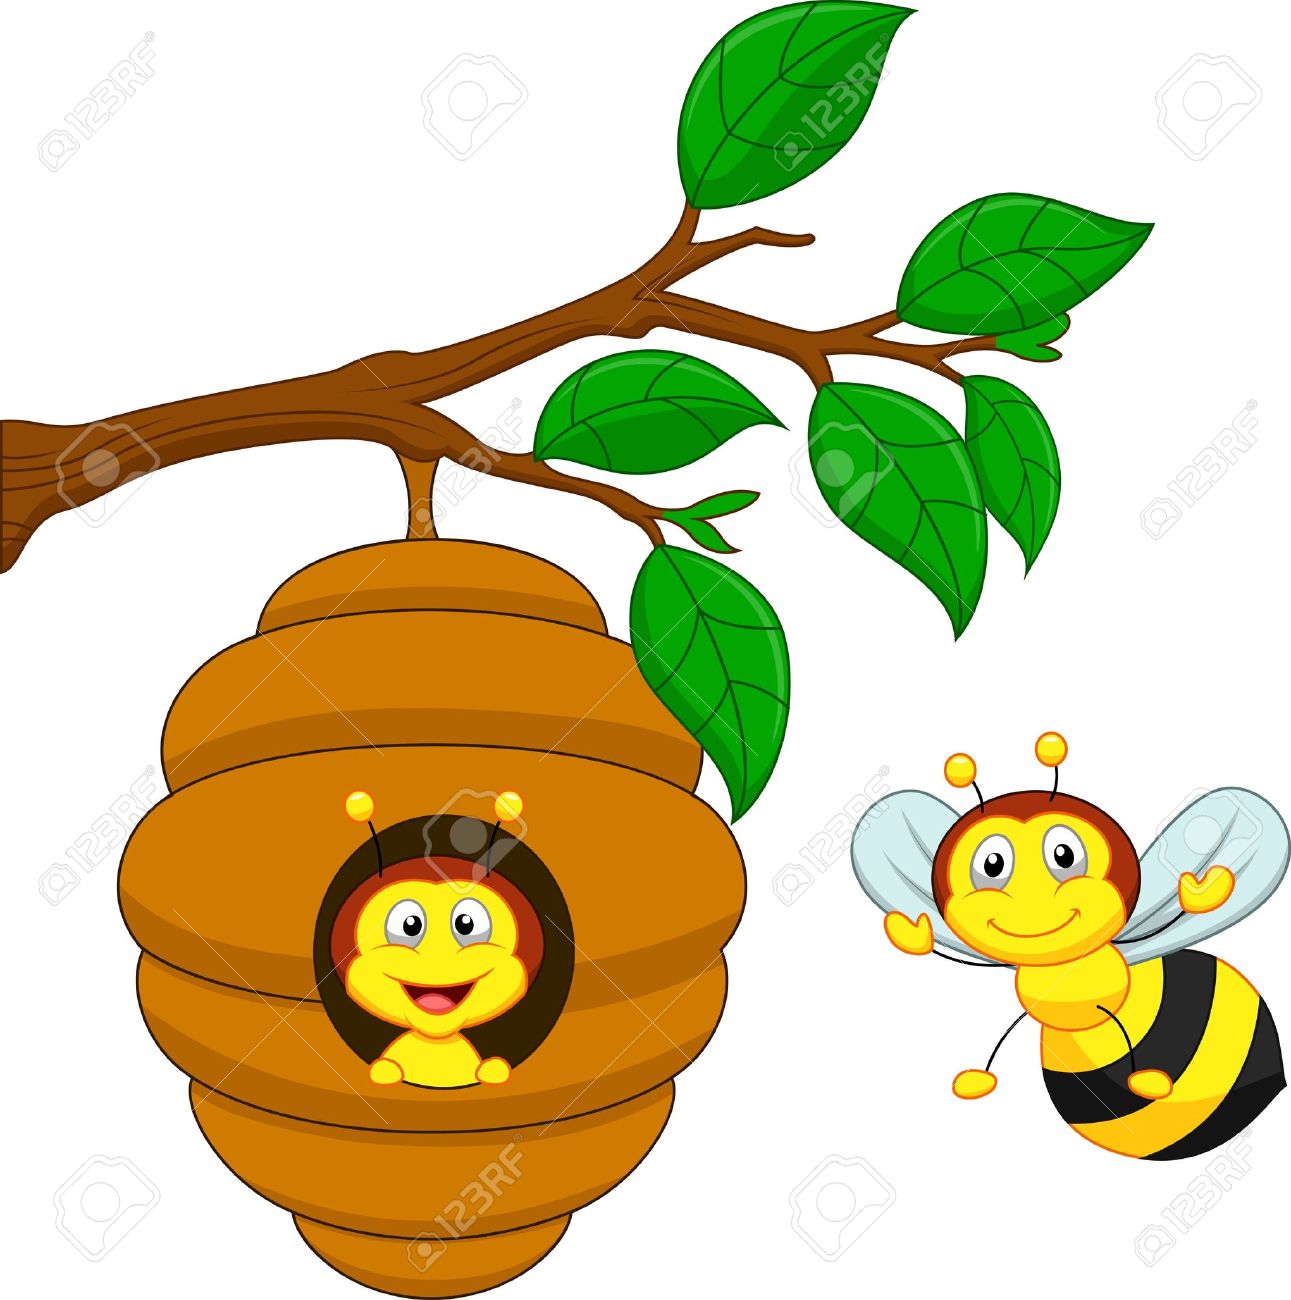 Bee Hive clipart #2, Download drawings